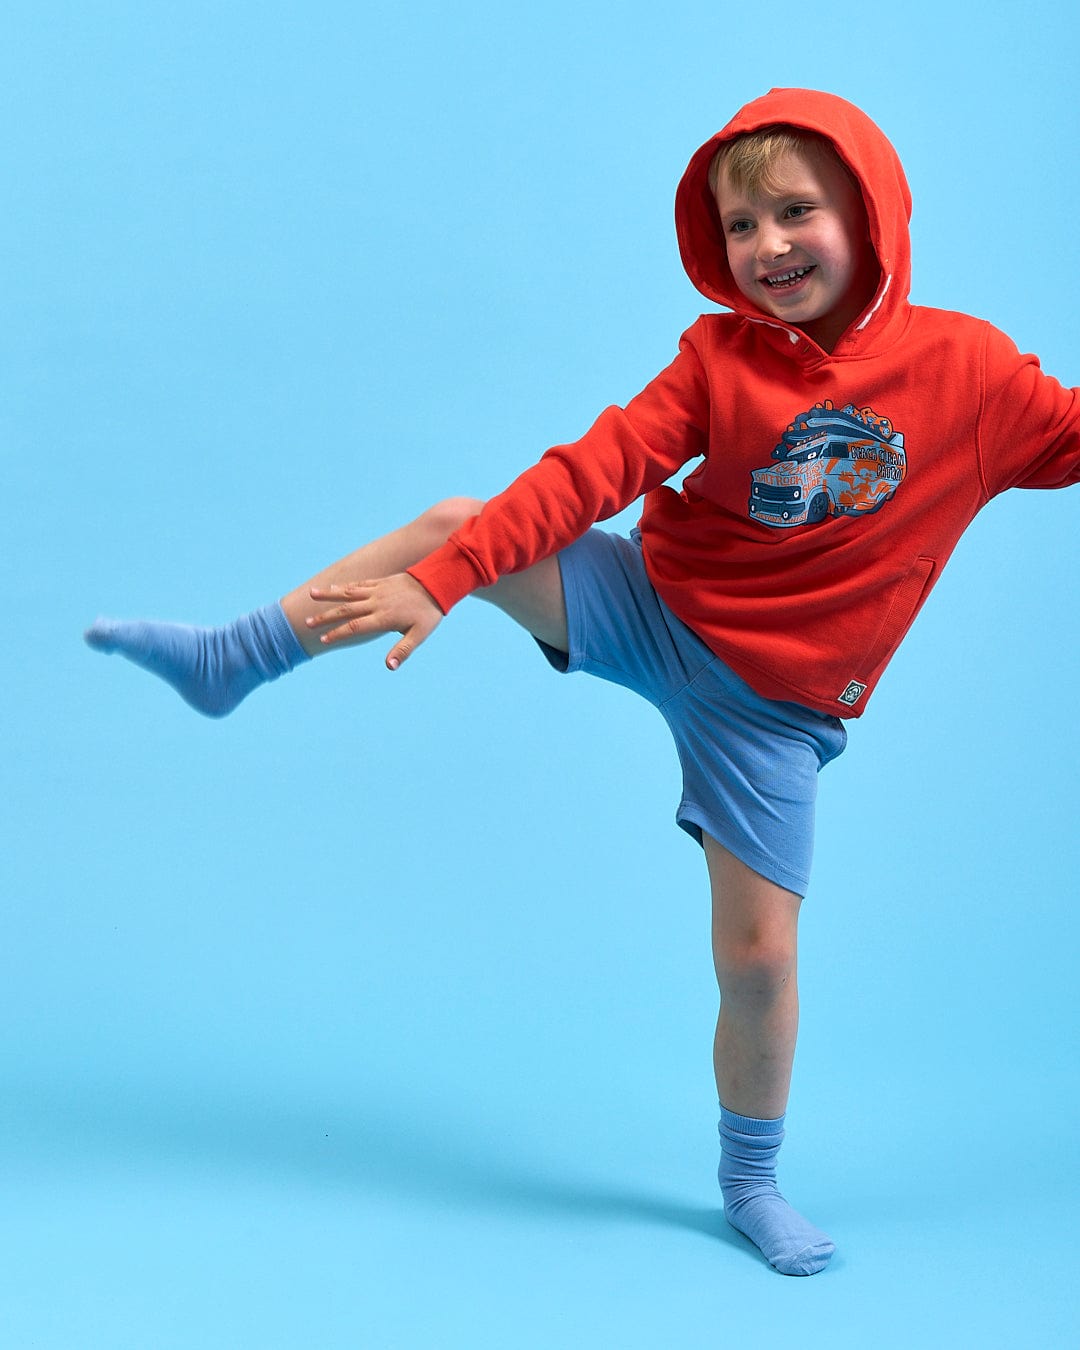 A young boy in a Saltrock Beach Patrol - Kids Pop Hoodie - Red and shorts doing a kick.